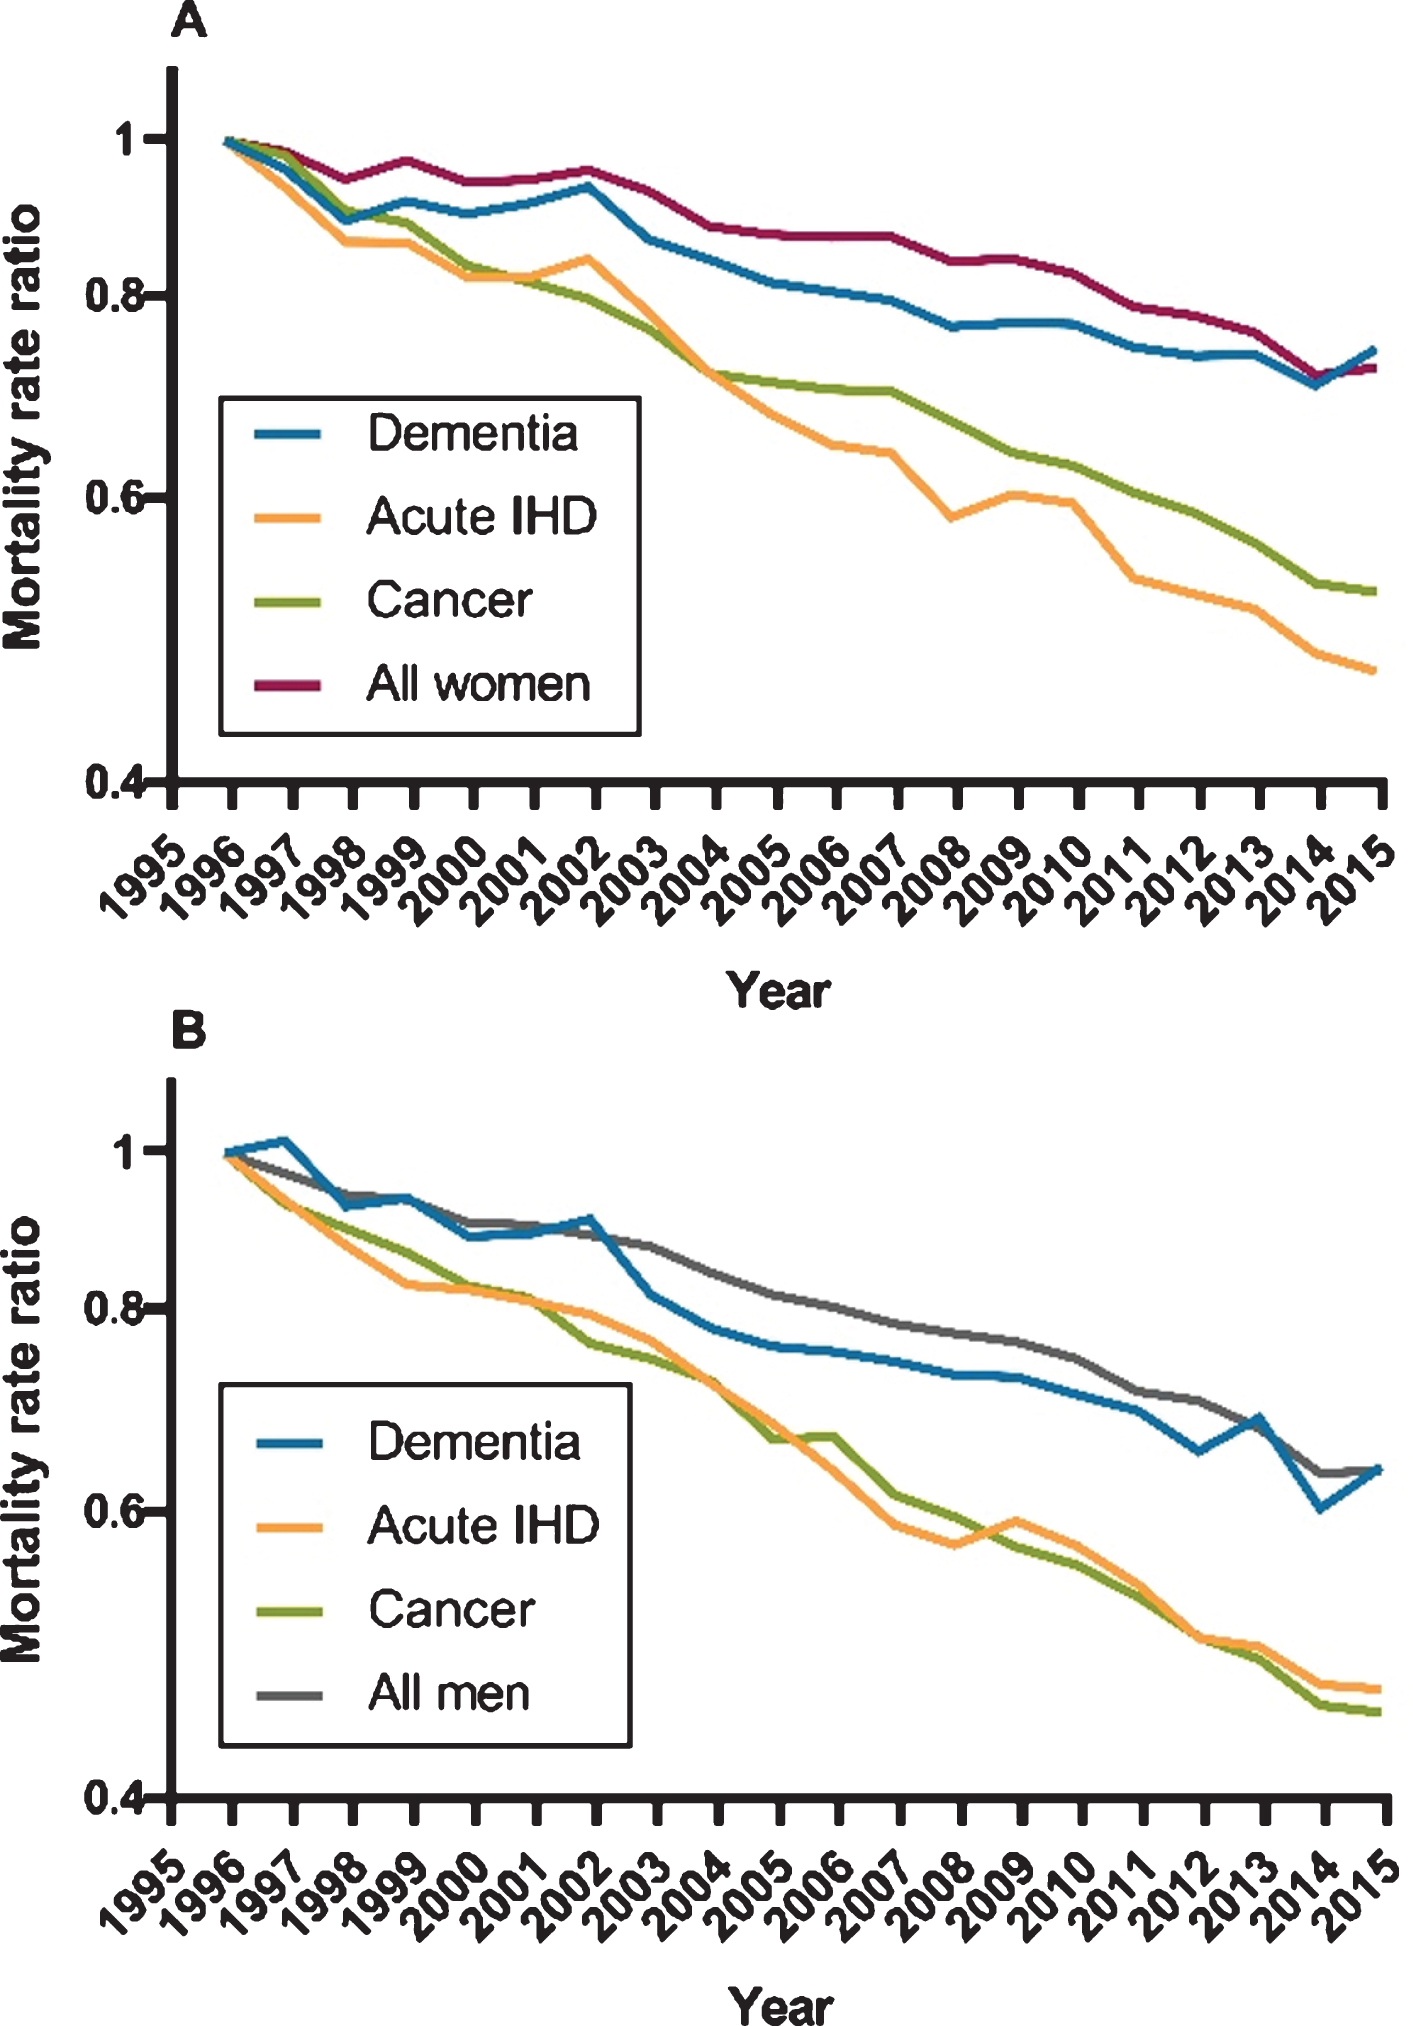 Time trend of all-cause mortality for women and men. Age-adjusted mortality rate ratios for women and men with dementia, acute ischemic heart disease (IHD), cancer, and the general elderly population. The reference value was defined as 1.00 in 1996. A) All-cause mortality in women. B) All-cause mortality in men.